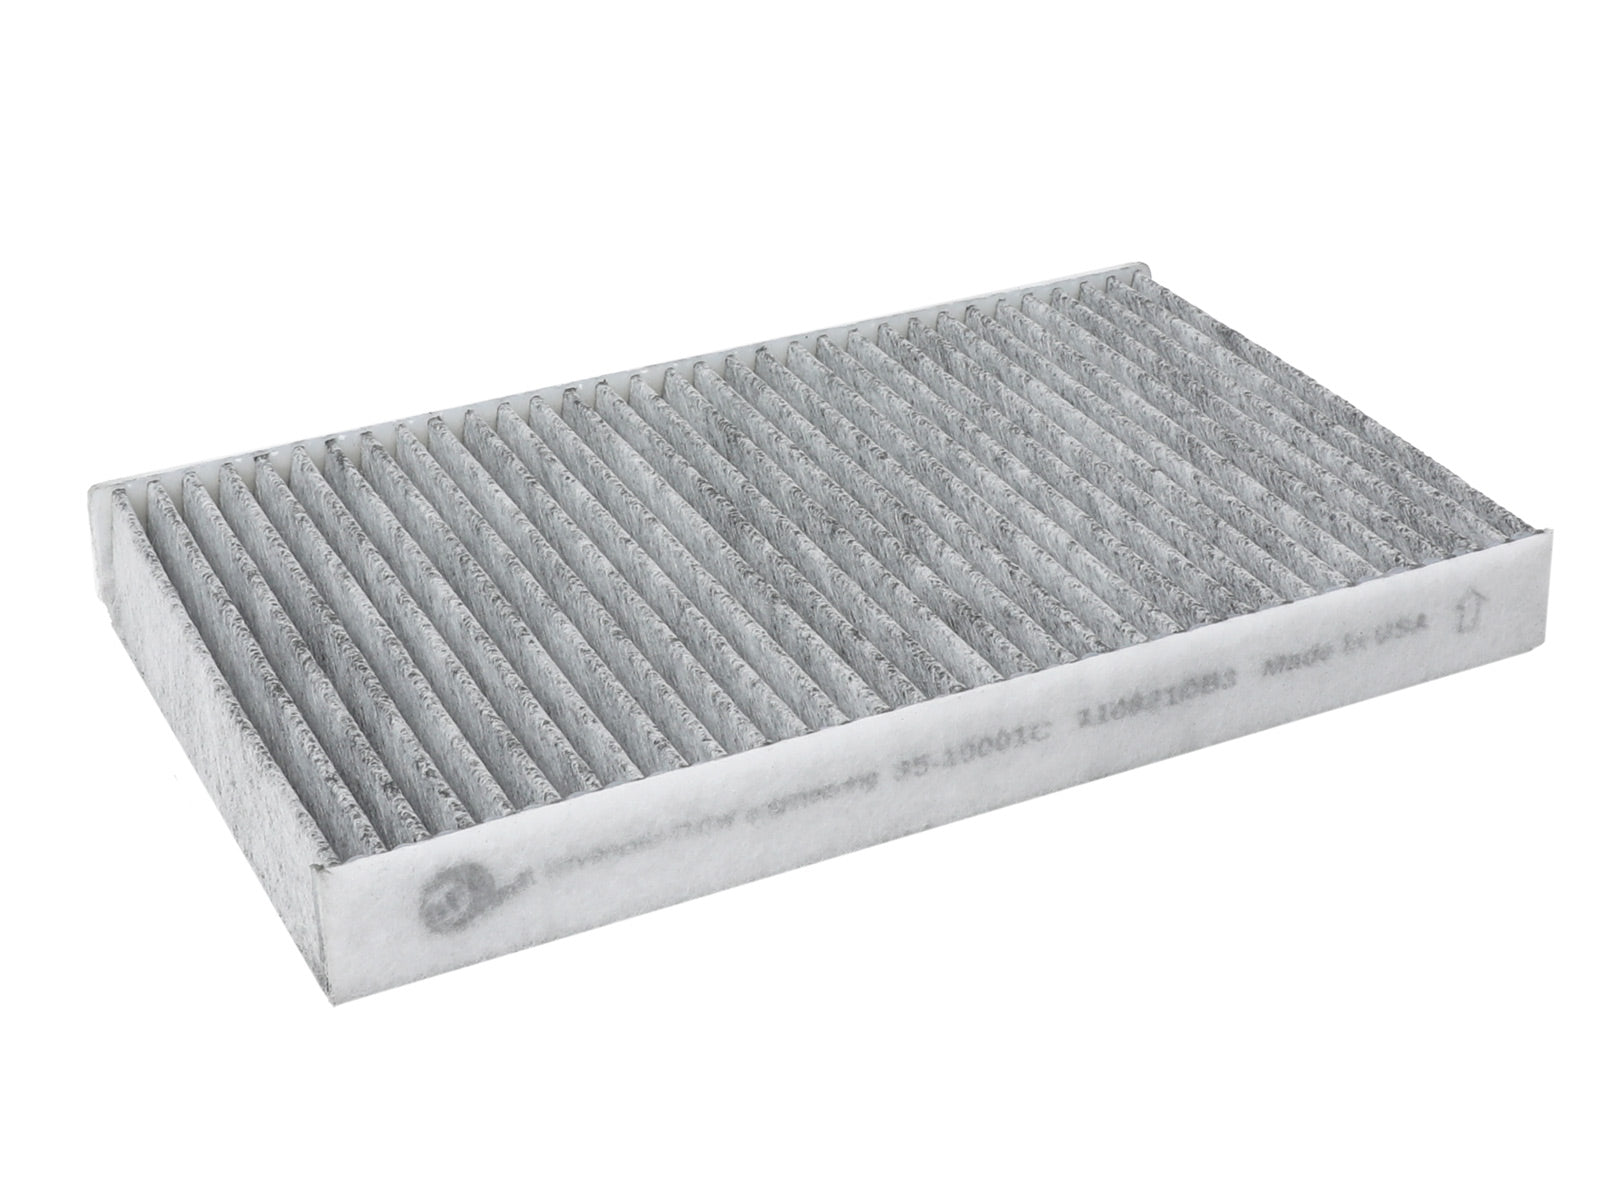 aFe Power Jeep (3.0) Cabin Air Filter 35-10001C